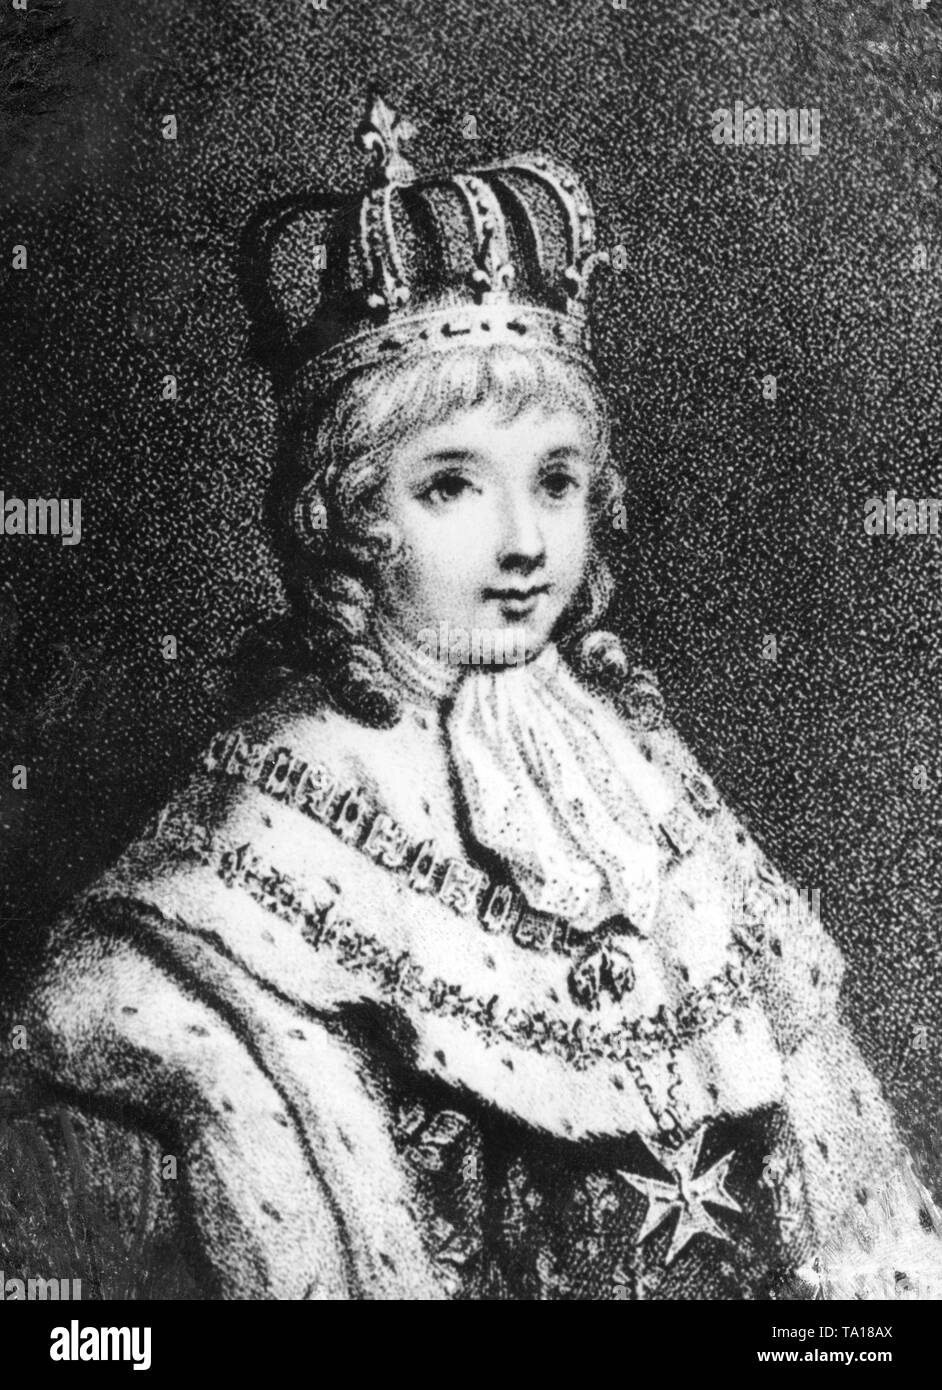 Louis XVII, the son of Louis XVI and Marie-Antoinette. After the arrest of his parents, he was put in care of the shoemaker and Jacobin Antoine Simon. Louis XVII died at the age of 10, probably due to tuberculosis. Stock Photo